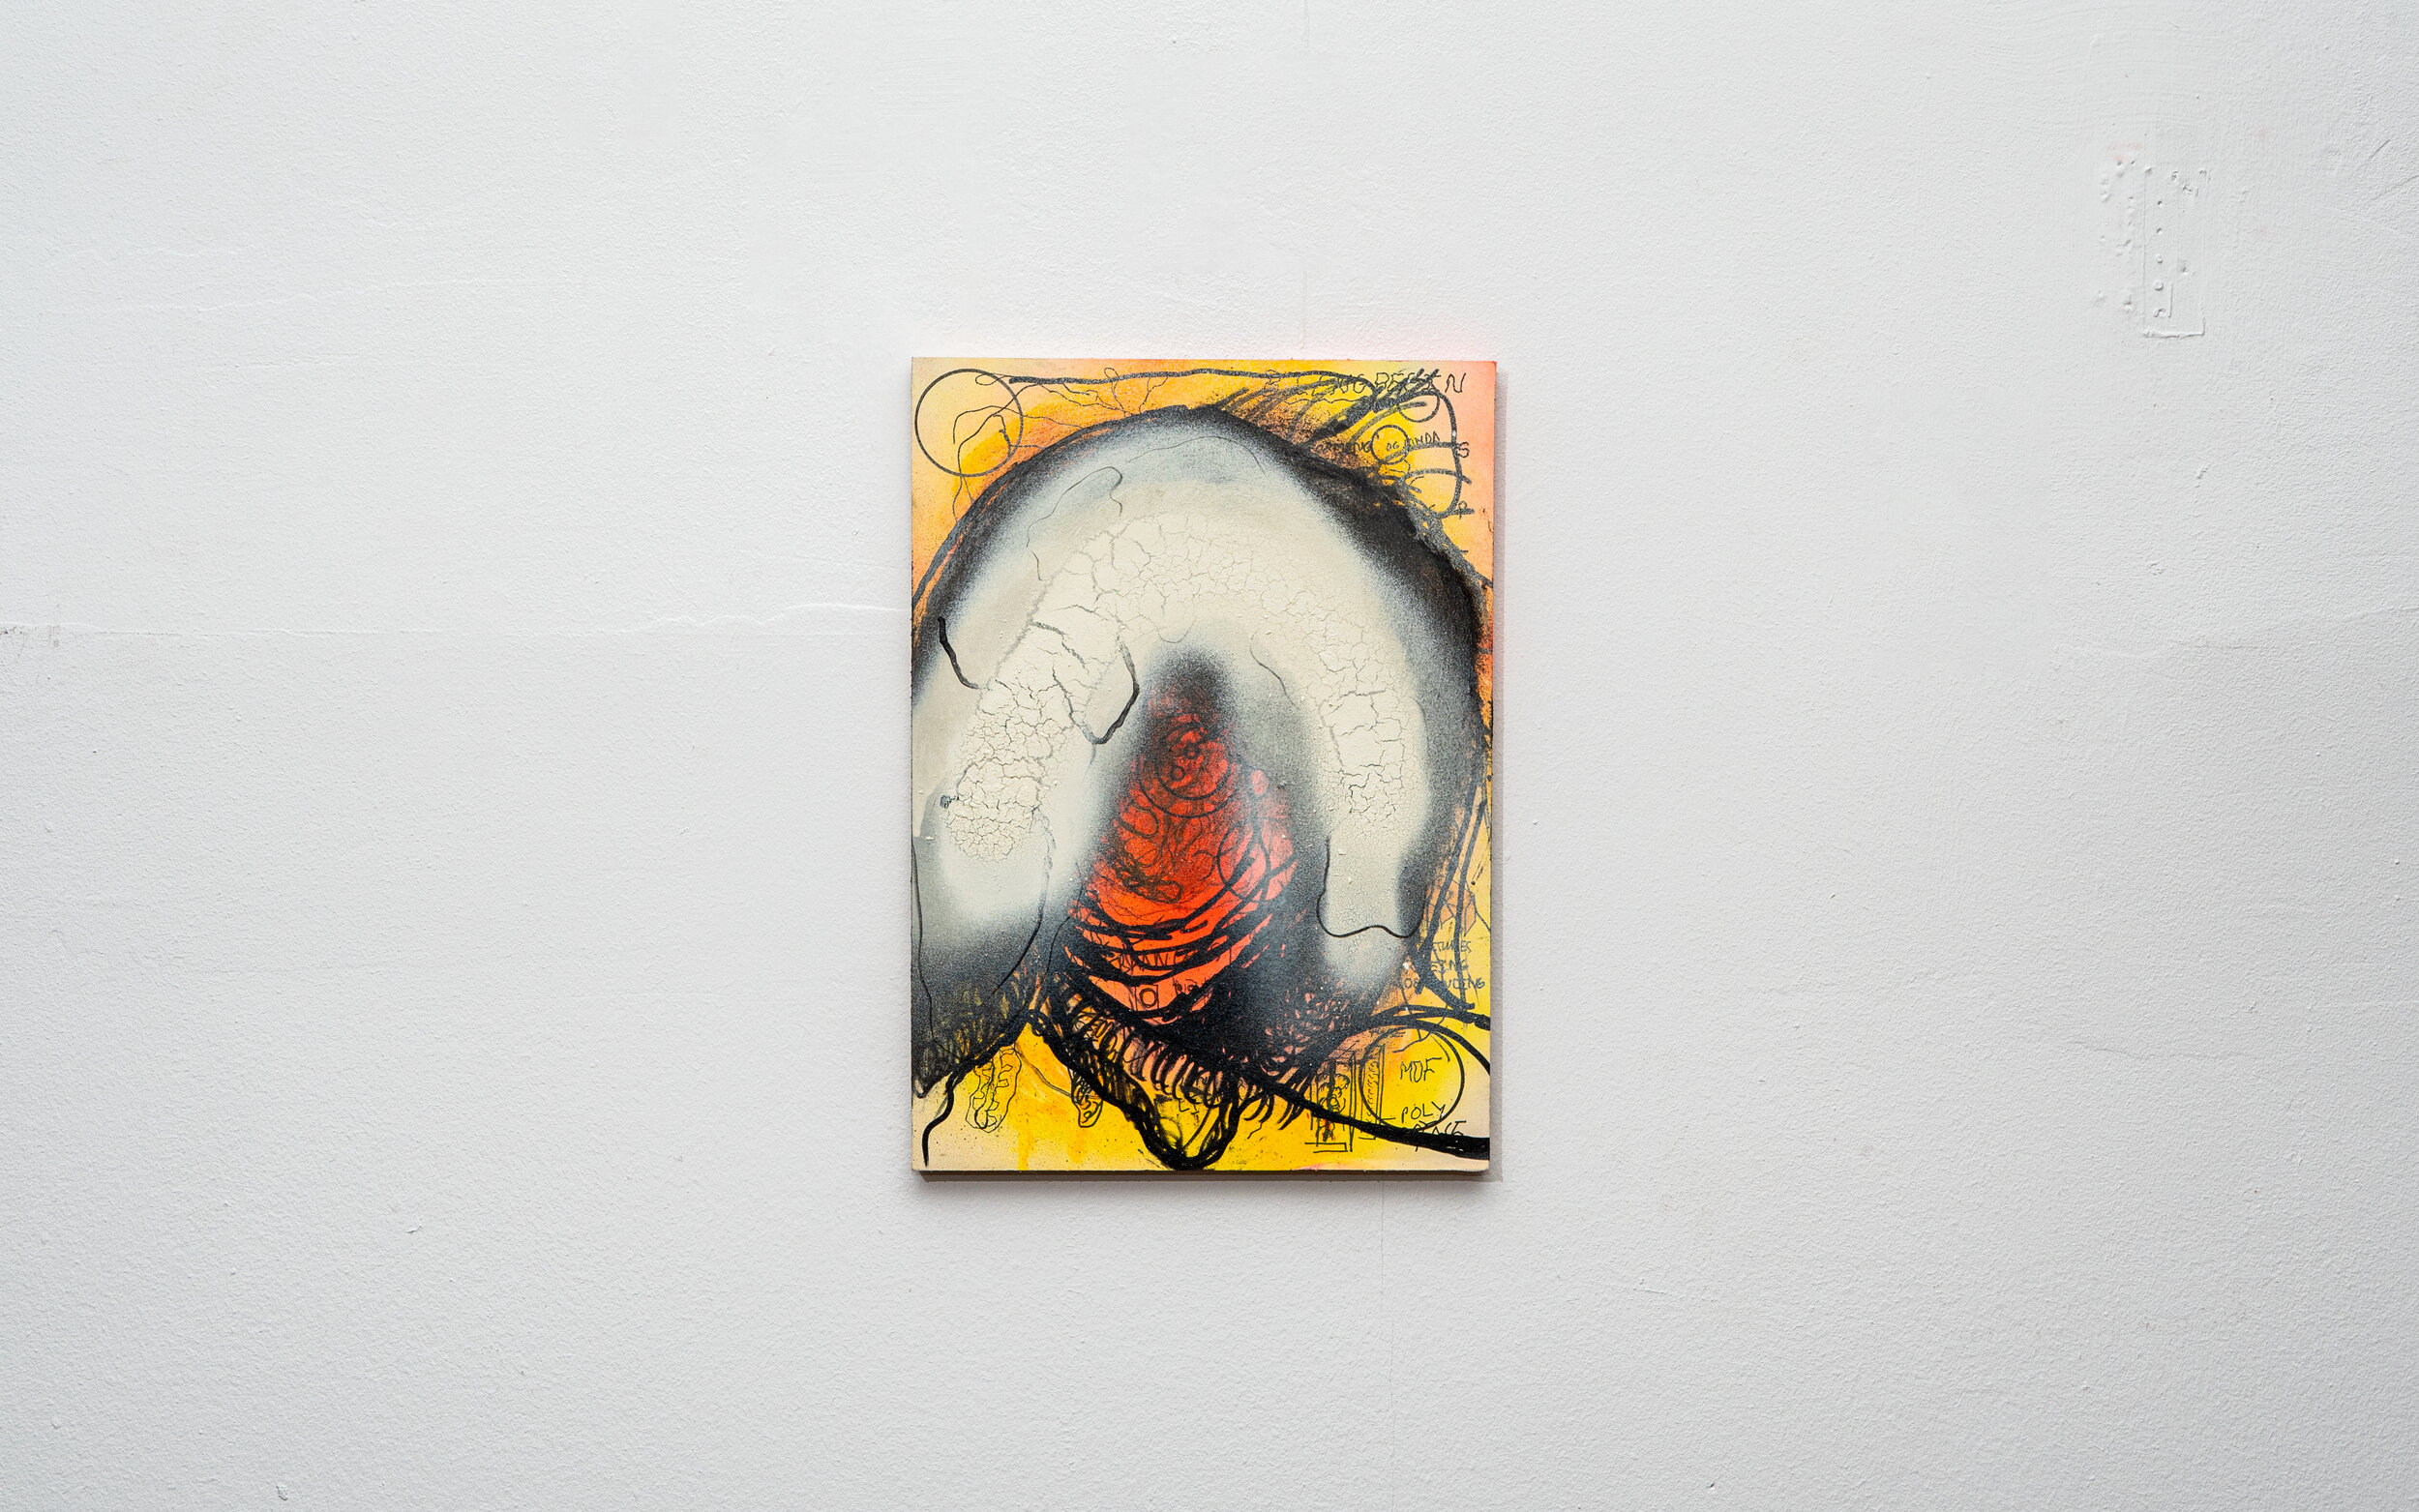  CORE, 30 x 42 x 2 cm, 2020,   oil paint, spray pain and ink on canvas mounted on wood panel 